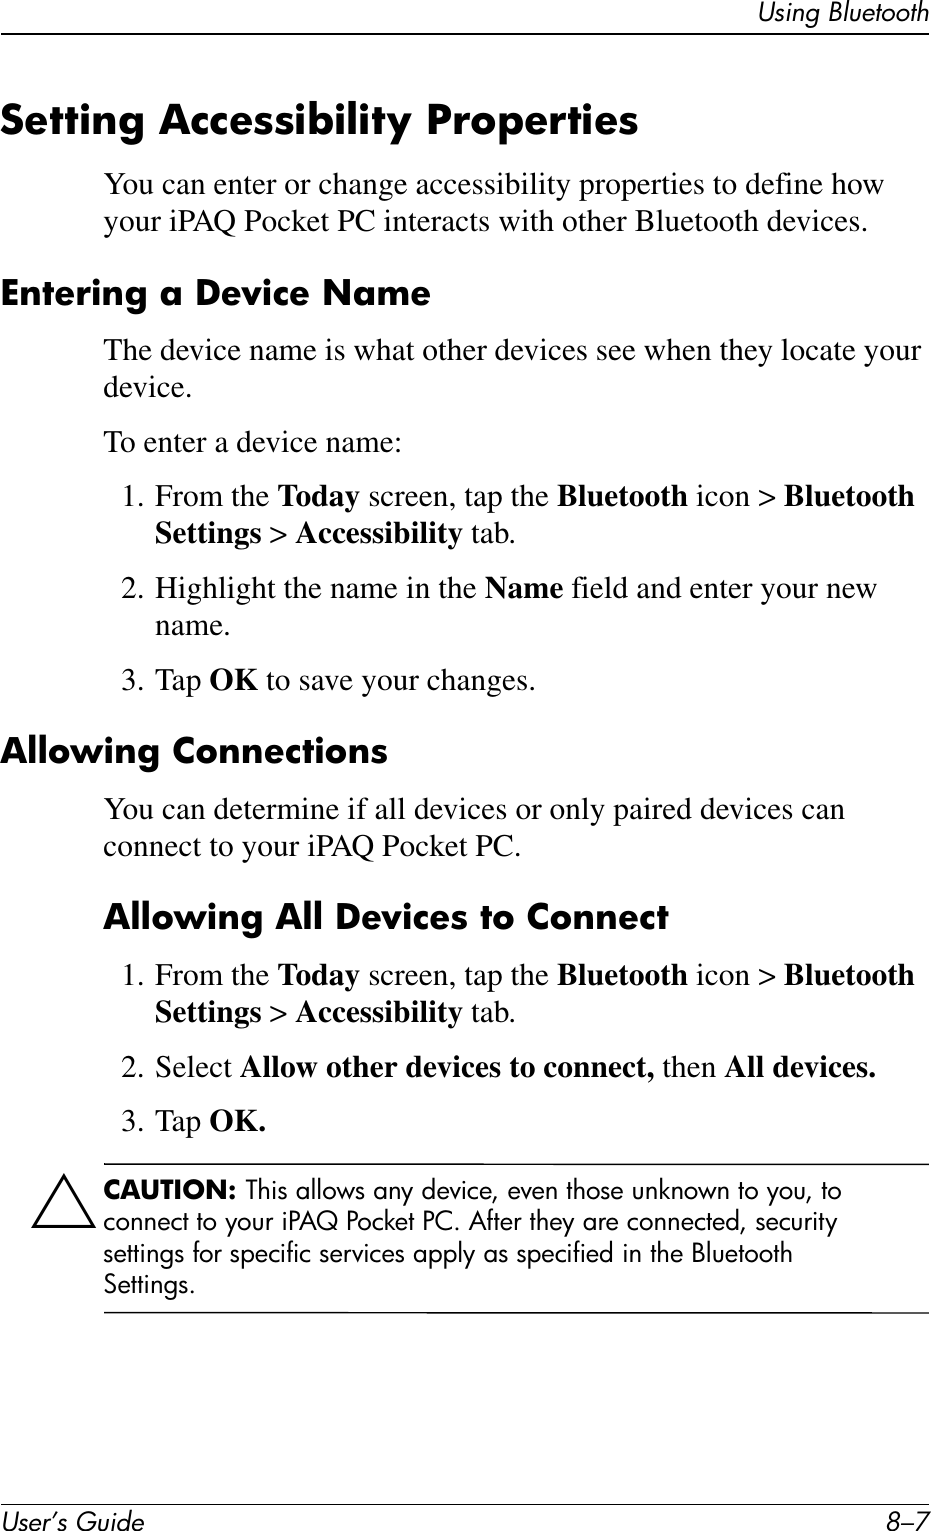 Using BluetoothUser’s Guide 8–7Setting Accessibility PropertiesYou can enter or change accessibility properties to define how your iPAQ Pocket PC interacts with other Bluetooth devices.Entering a Device NameThe device name is what other devices see when they locate your device.To enter a device name:1. From the Today screen, tap the Bluetooth icon &gt; Bluetooth Settings &gt; Accessibility tab.2. Highlight the name in the Name field and enter your new name.3. Tap OK to save your changes.Allowing ConnectionsYou can determine if all devices or only paired devices can connect to your iPAQ Pocket PC.Allowing All Devices to Connect1. From the Today screen, tap the Bluetooth icon &gt; Bluetooth Settings &gt; Accessibility tab.2. Select Allow other devices to connect, then All devices.3. Tap OK.ÄCAUTION: This allows any device, even those unknown to you, to connect to your iPAQ Pocket PC. After they are connected, security settings for specific services apply as specified in the Bluetooth Settings.